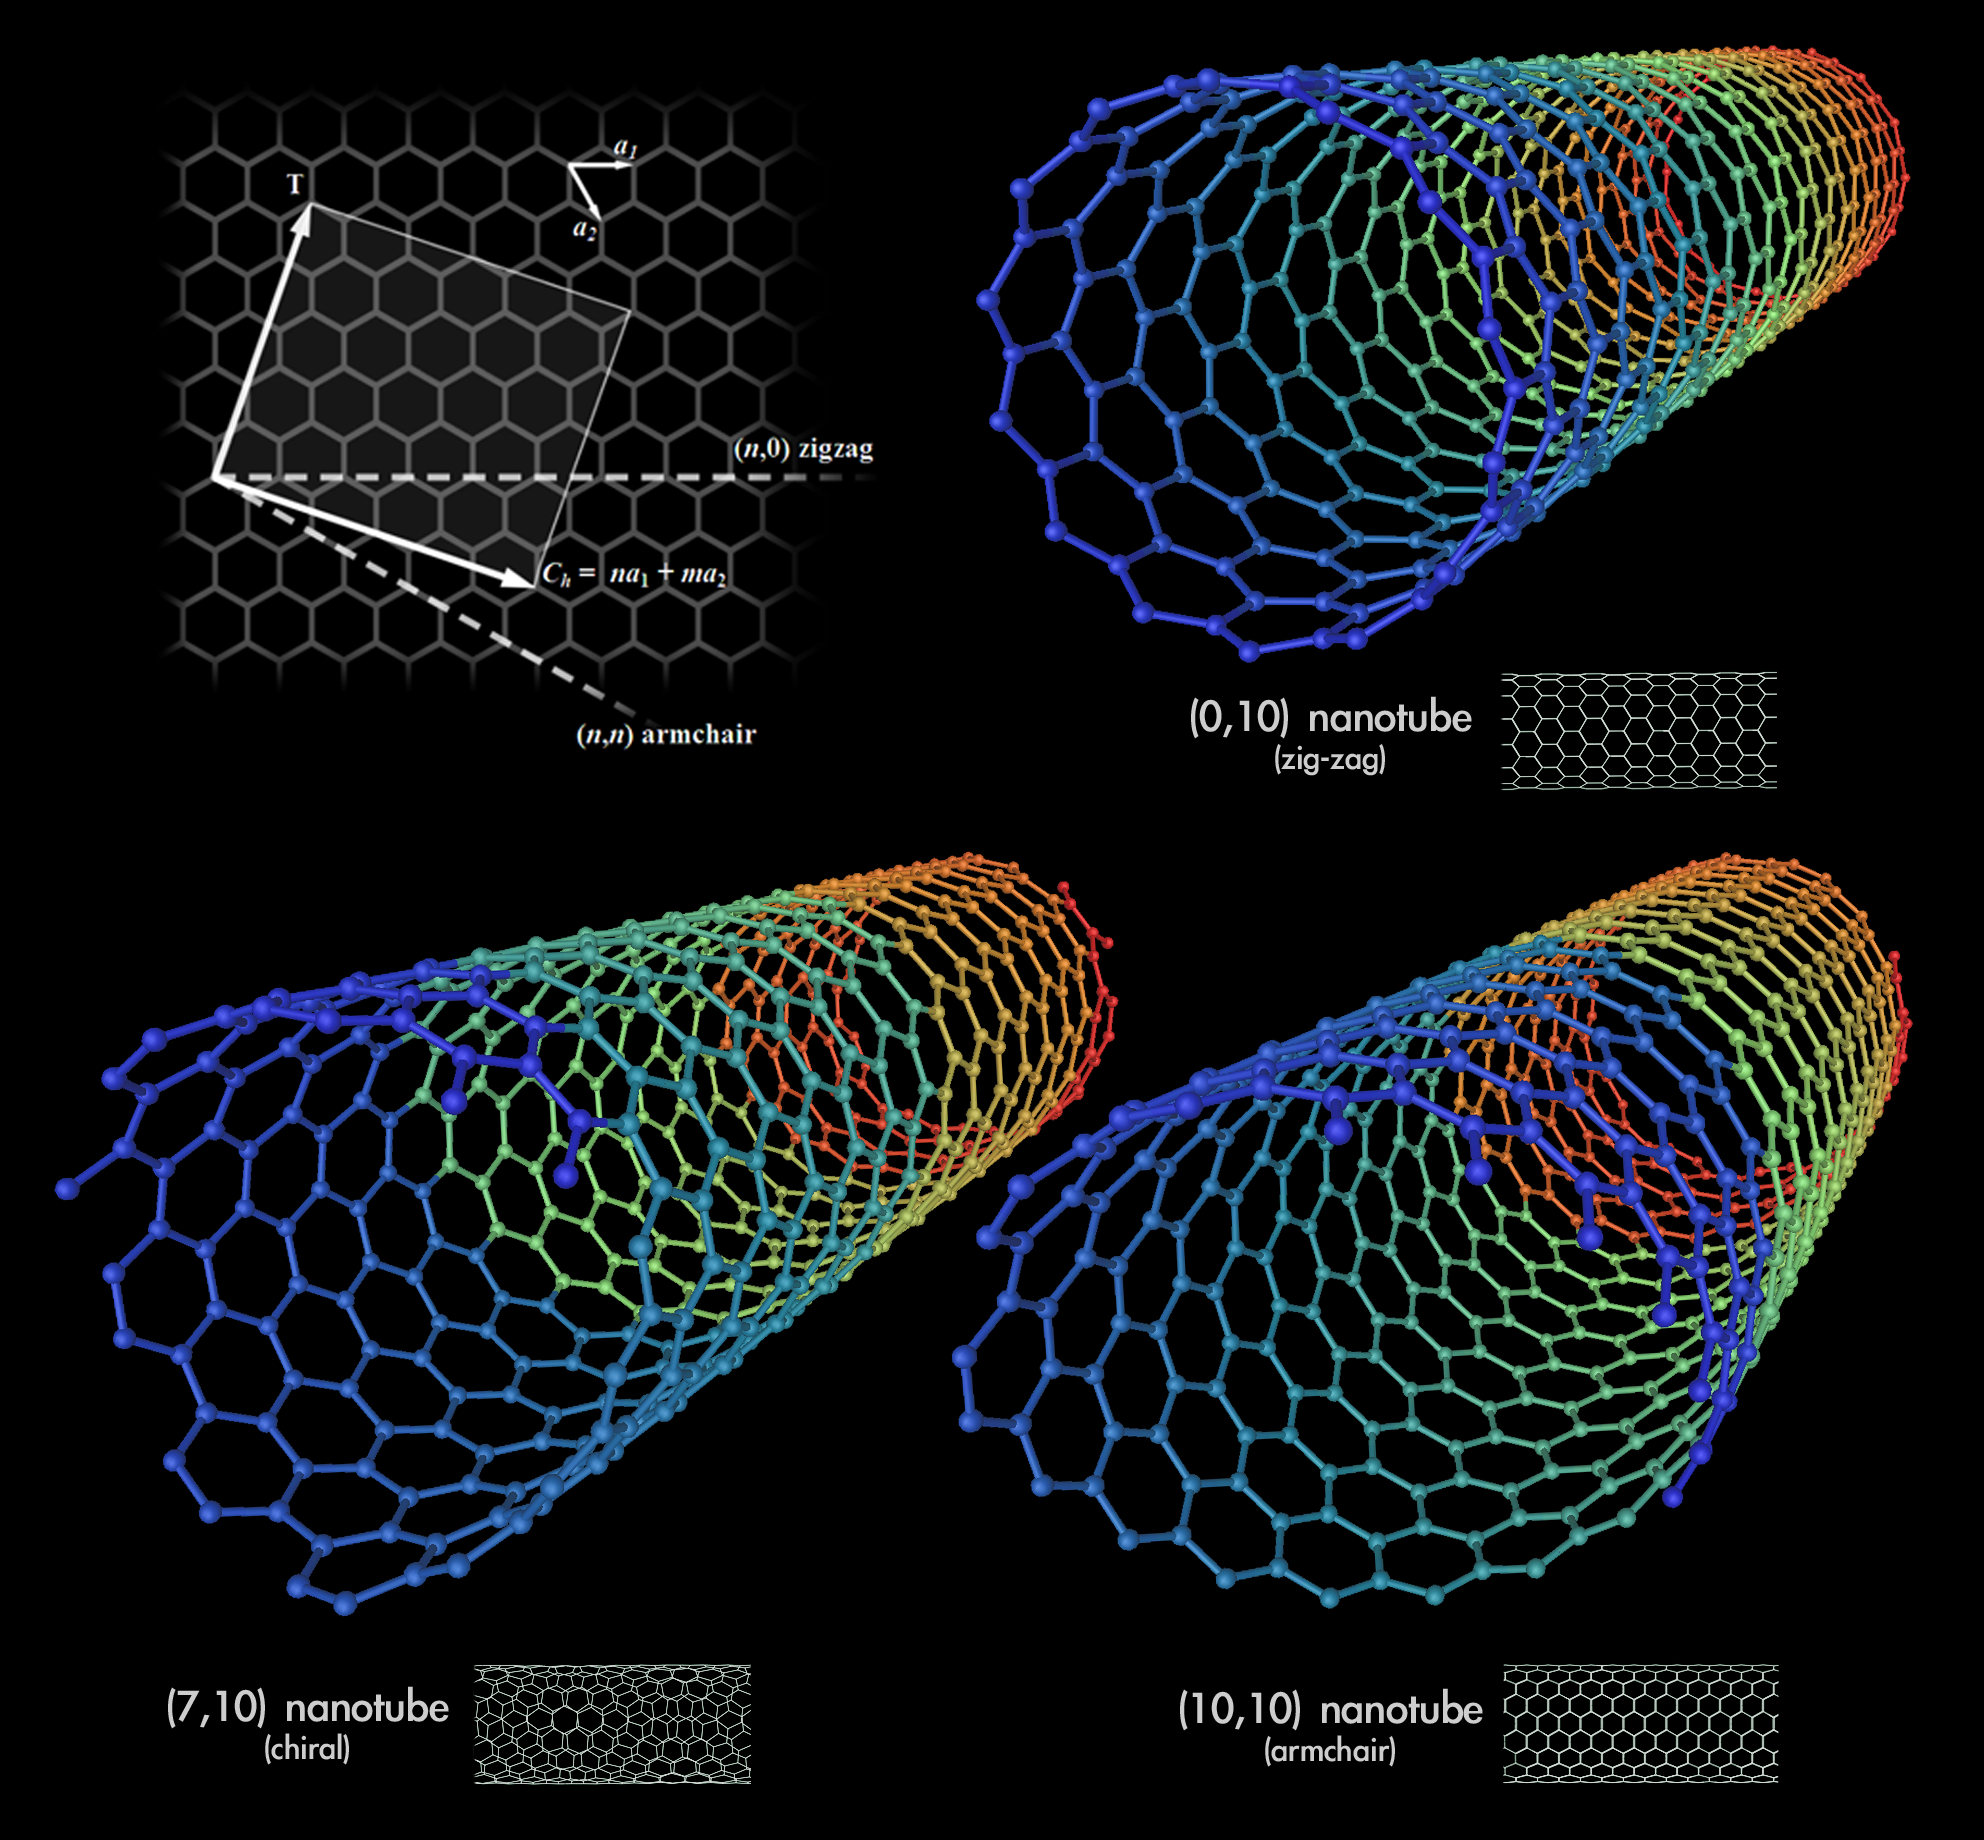 A visual representation of different types of carbon nanotubes. Image via Wikimedia Commons.